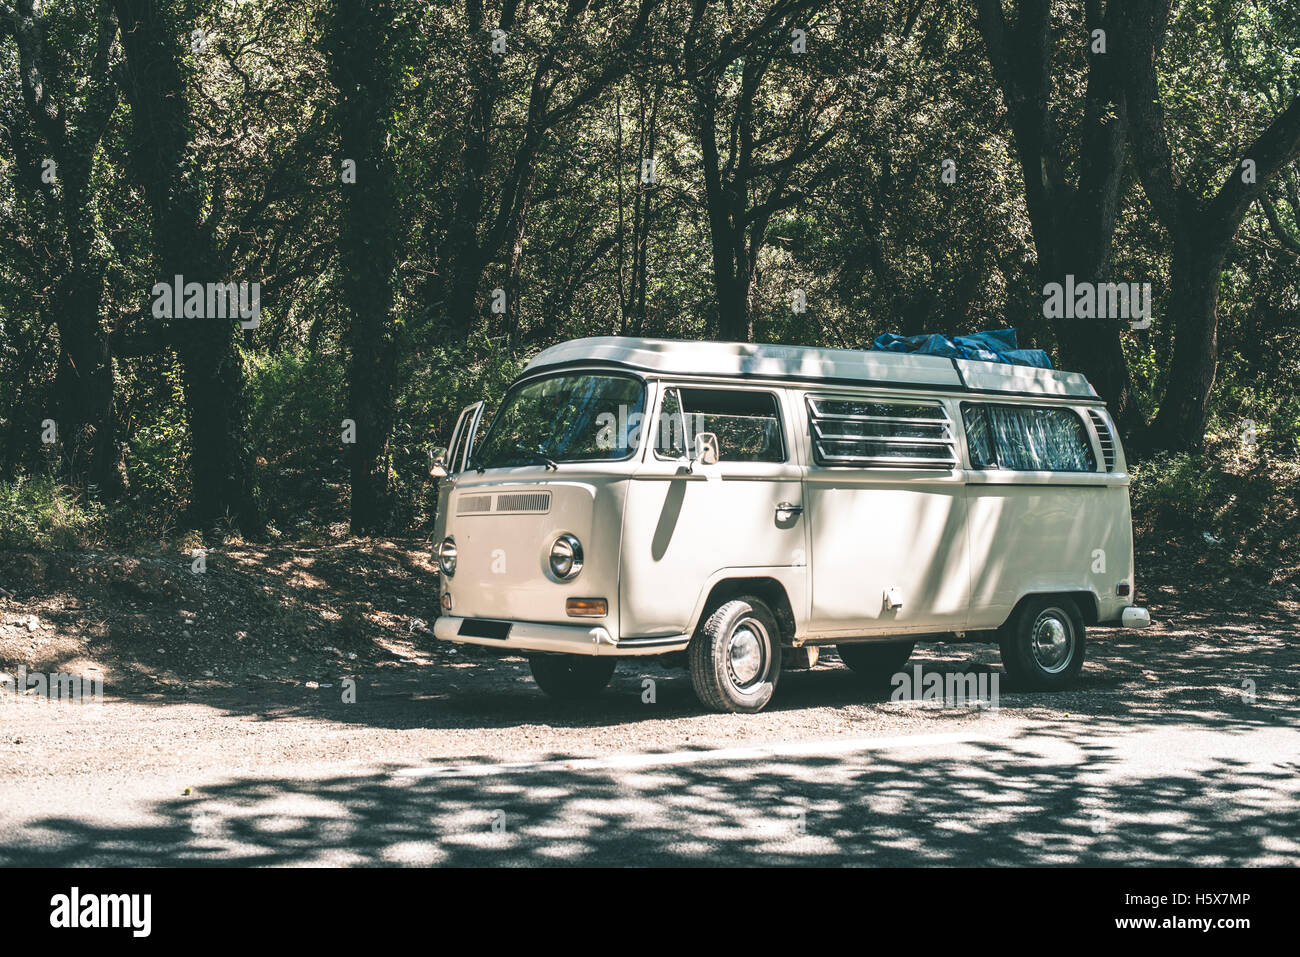 Vintage white bus camper on the road. Stock Photo